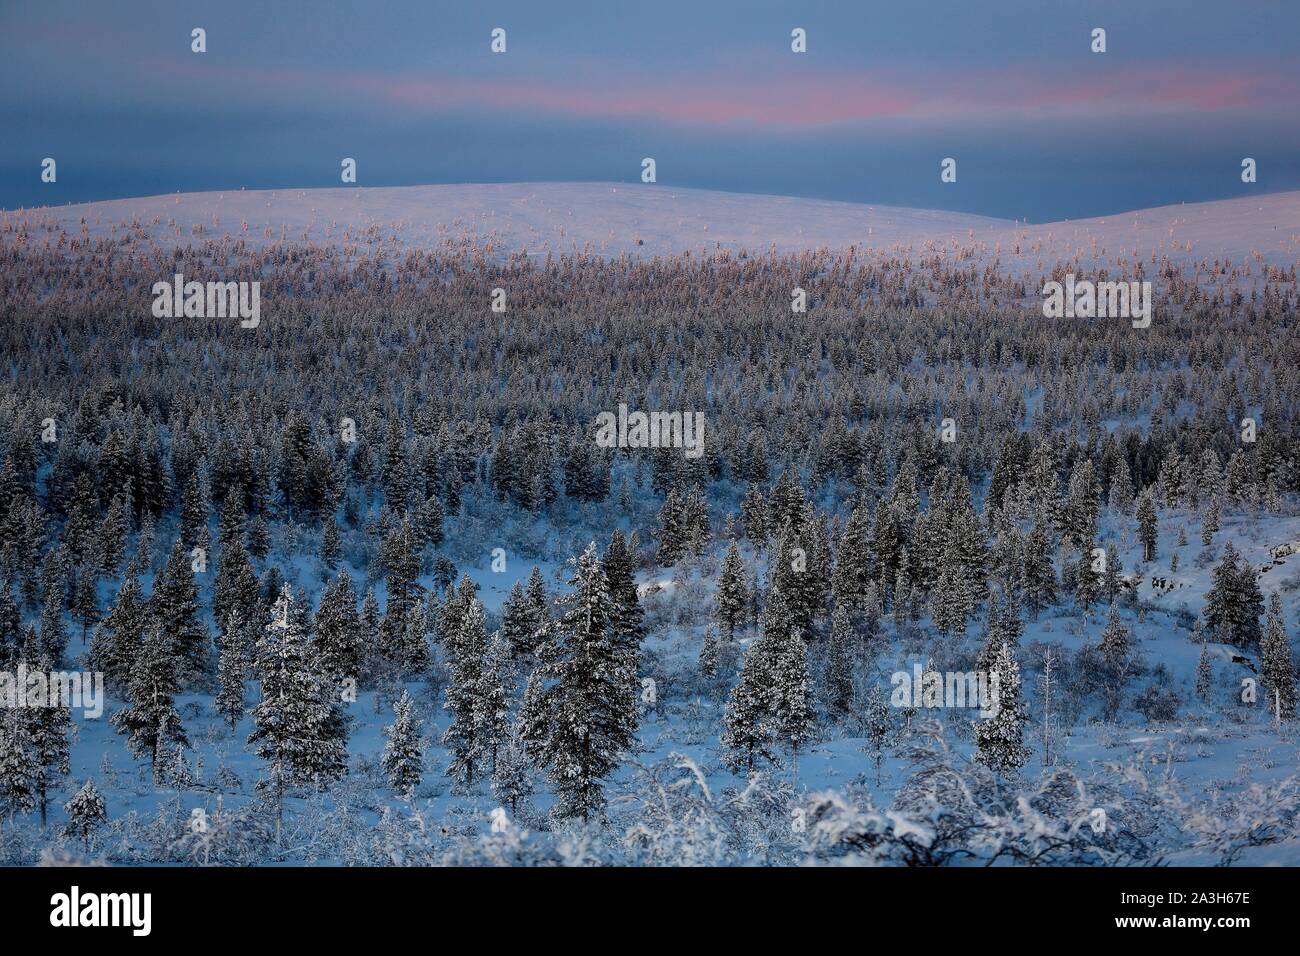 Finland, Lapland, Inari, the Boreal Forest covers more than 70% of the Finnish territory Stock Photo